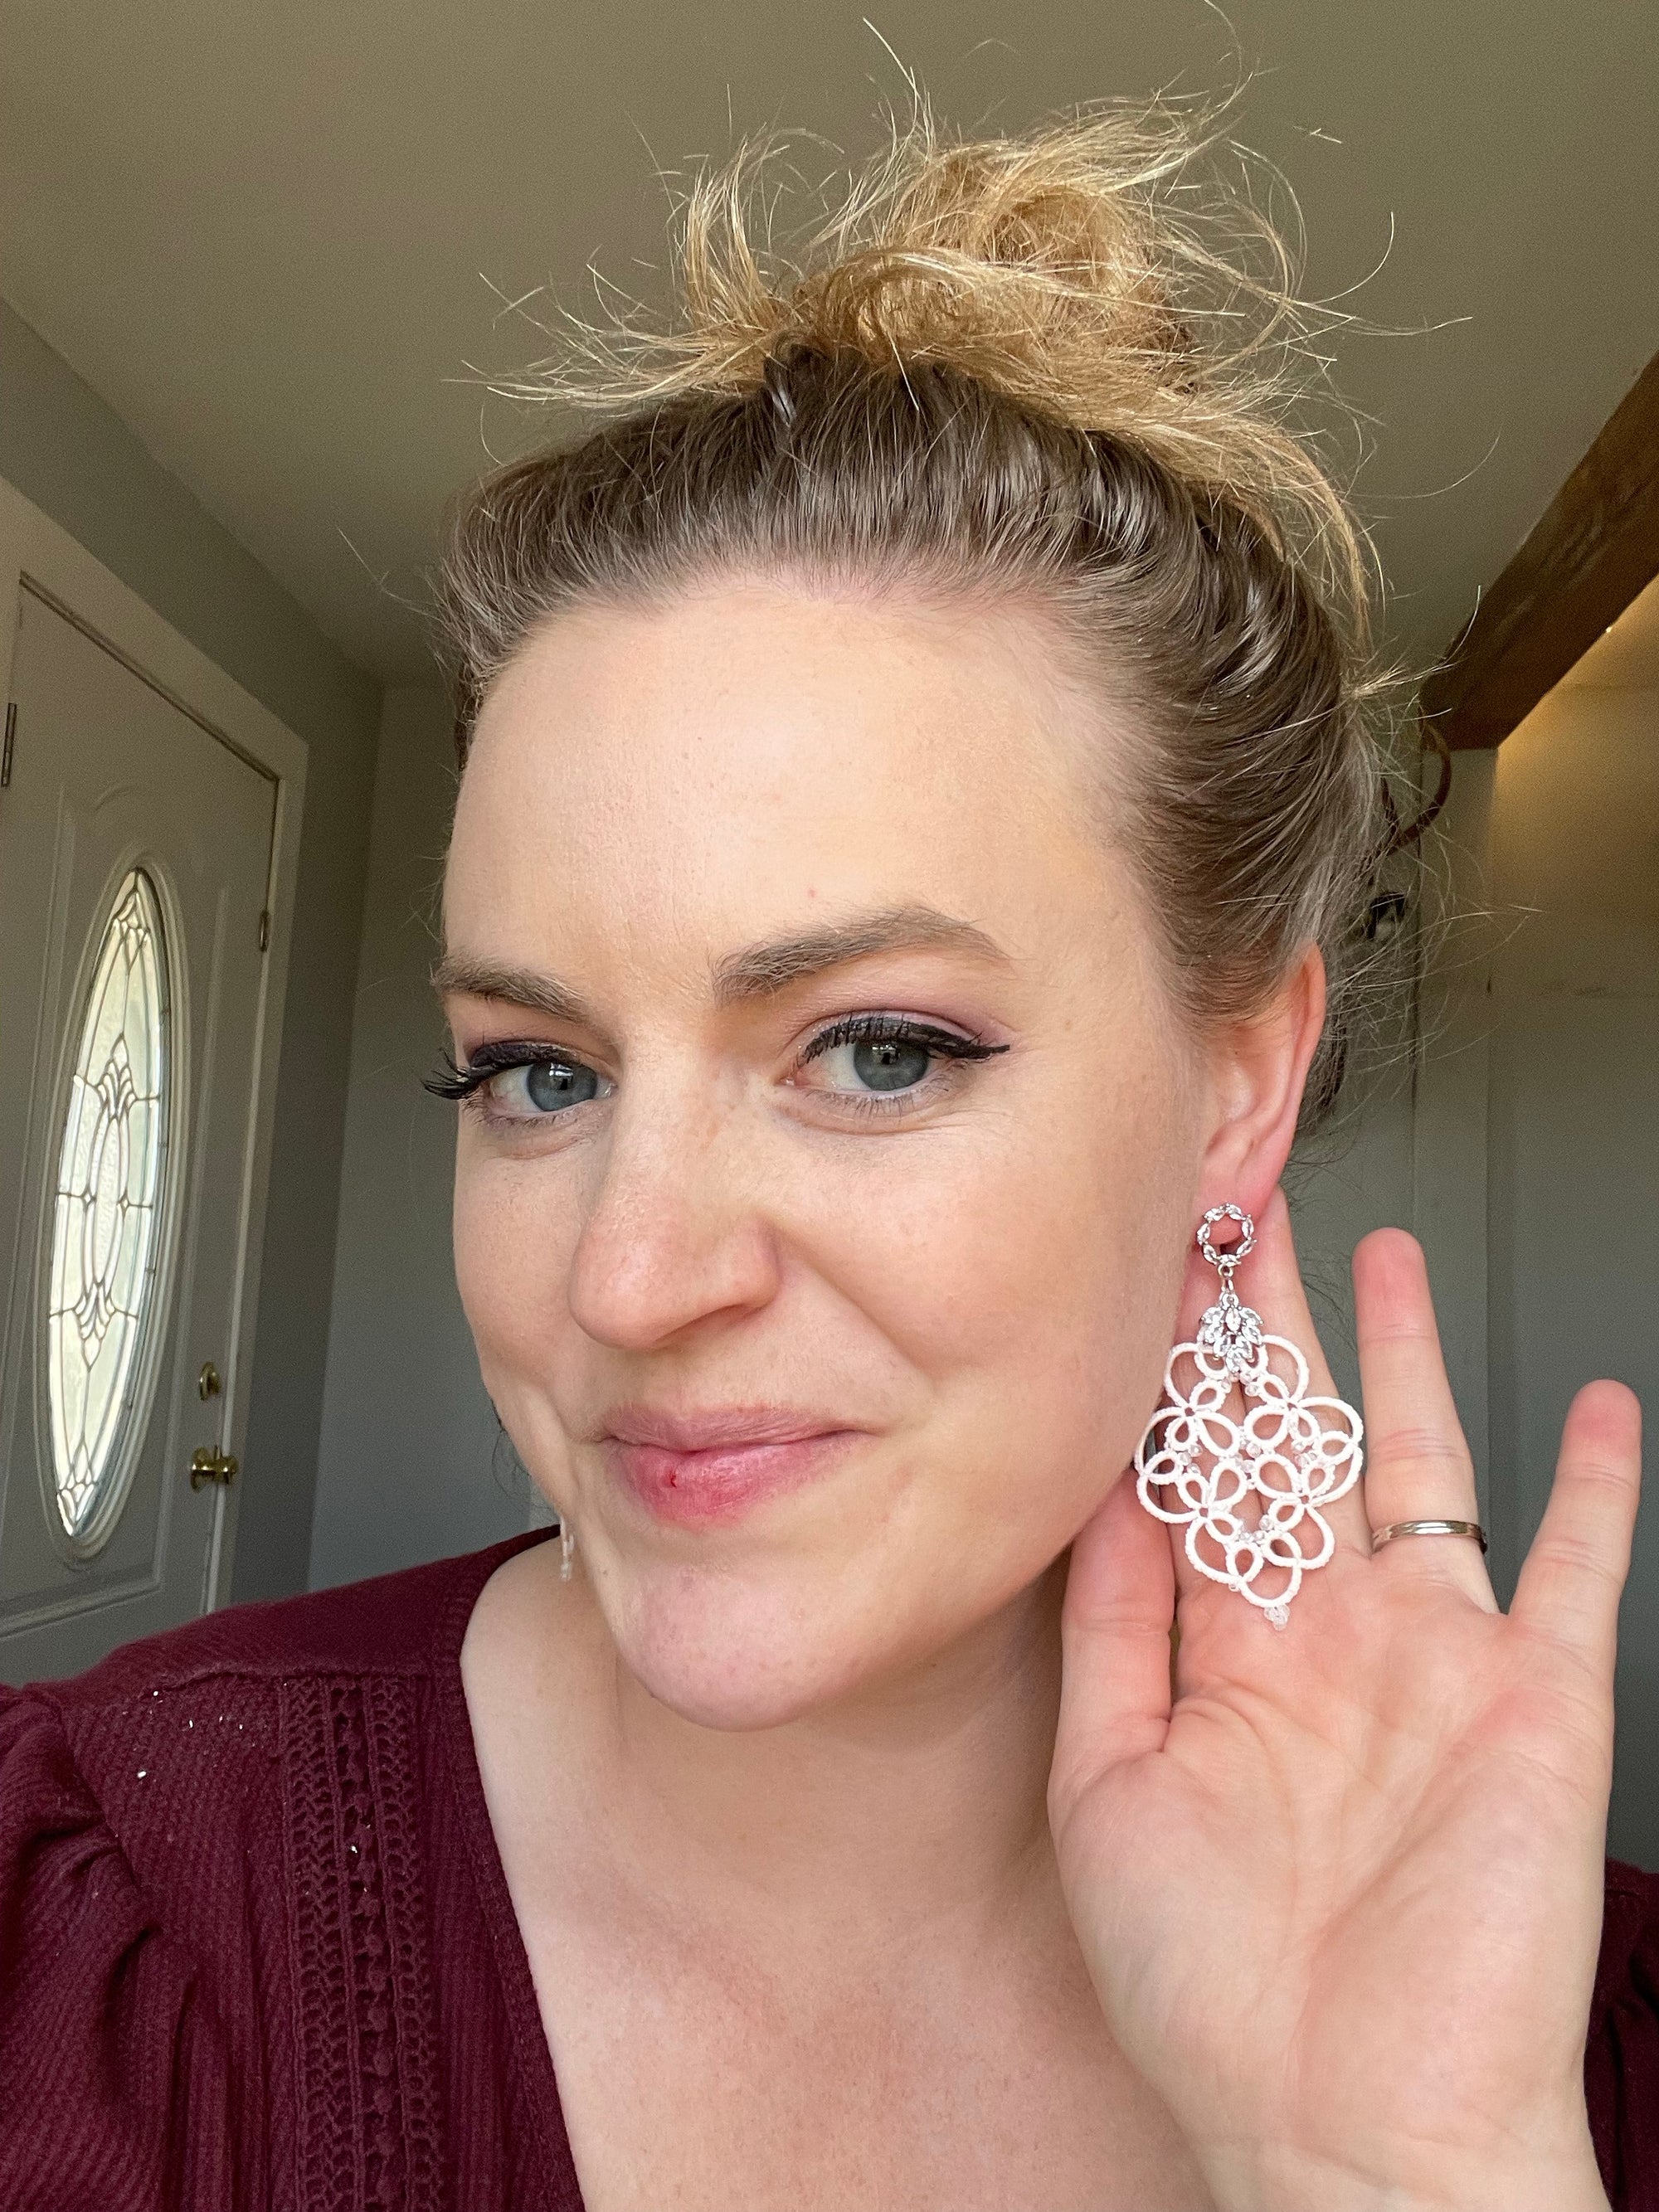 Tatted Lace Valentine's Earrings